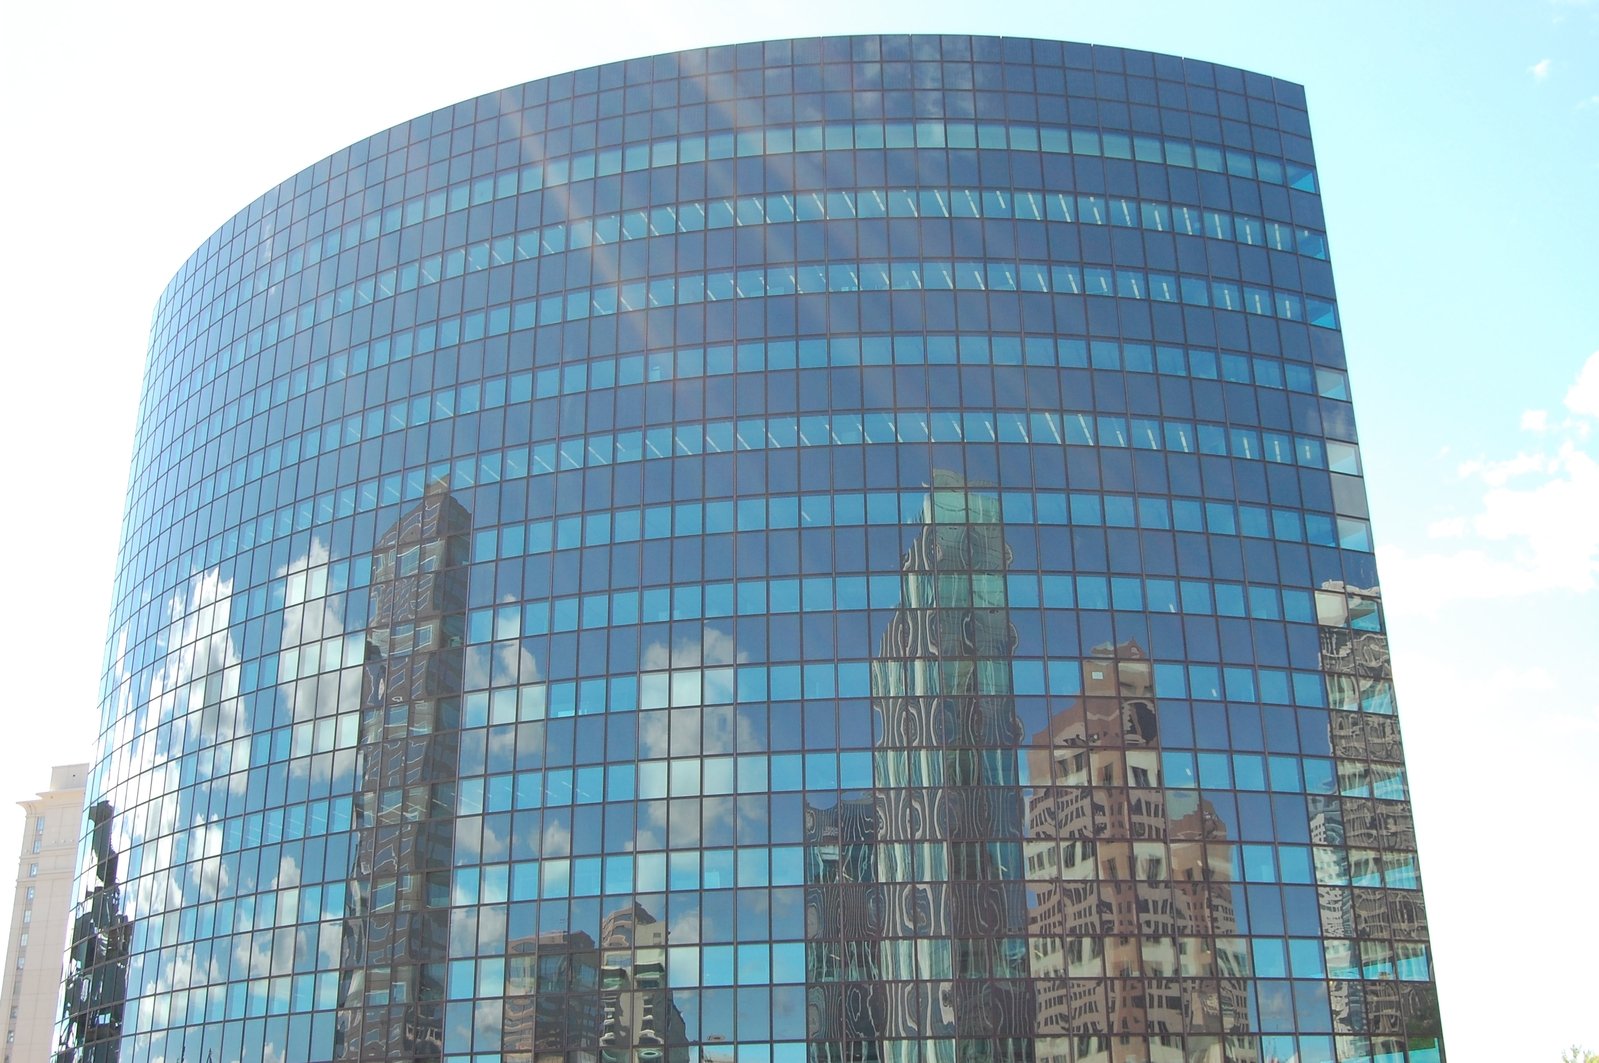 a large round blue building with many windows